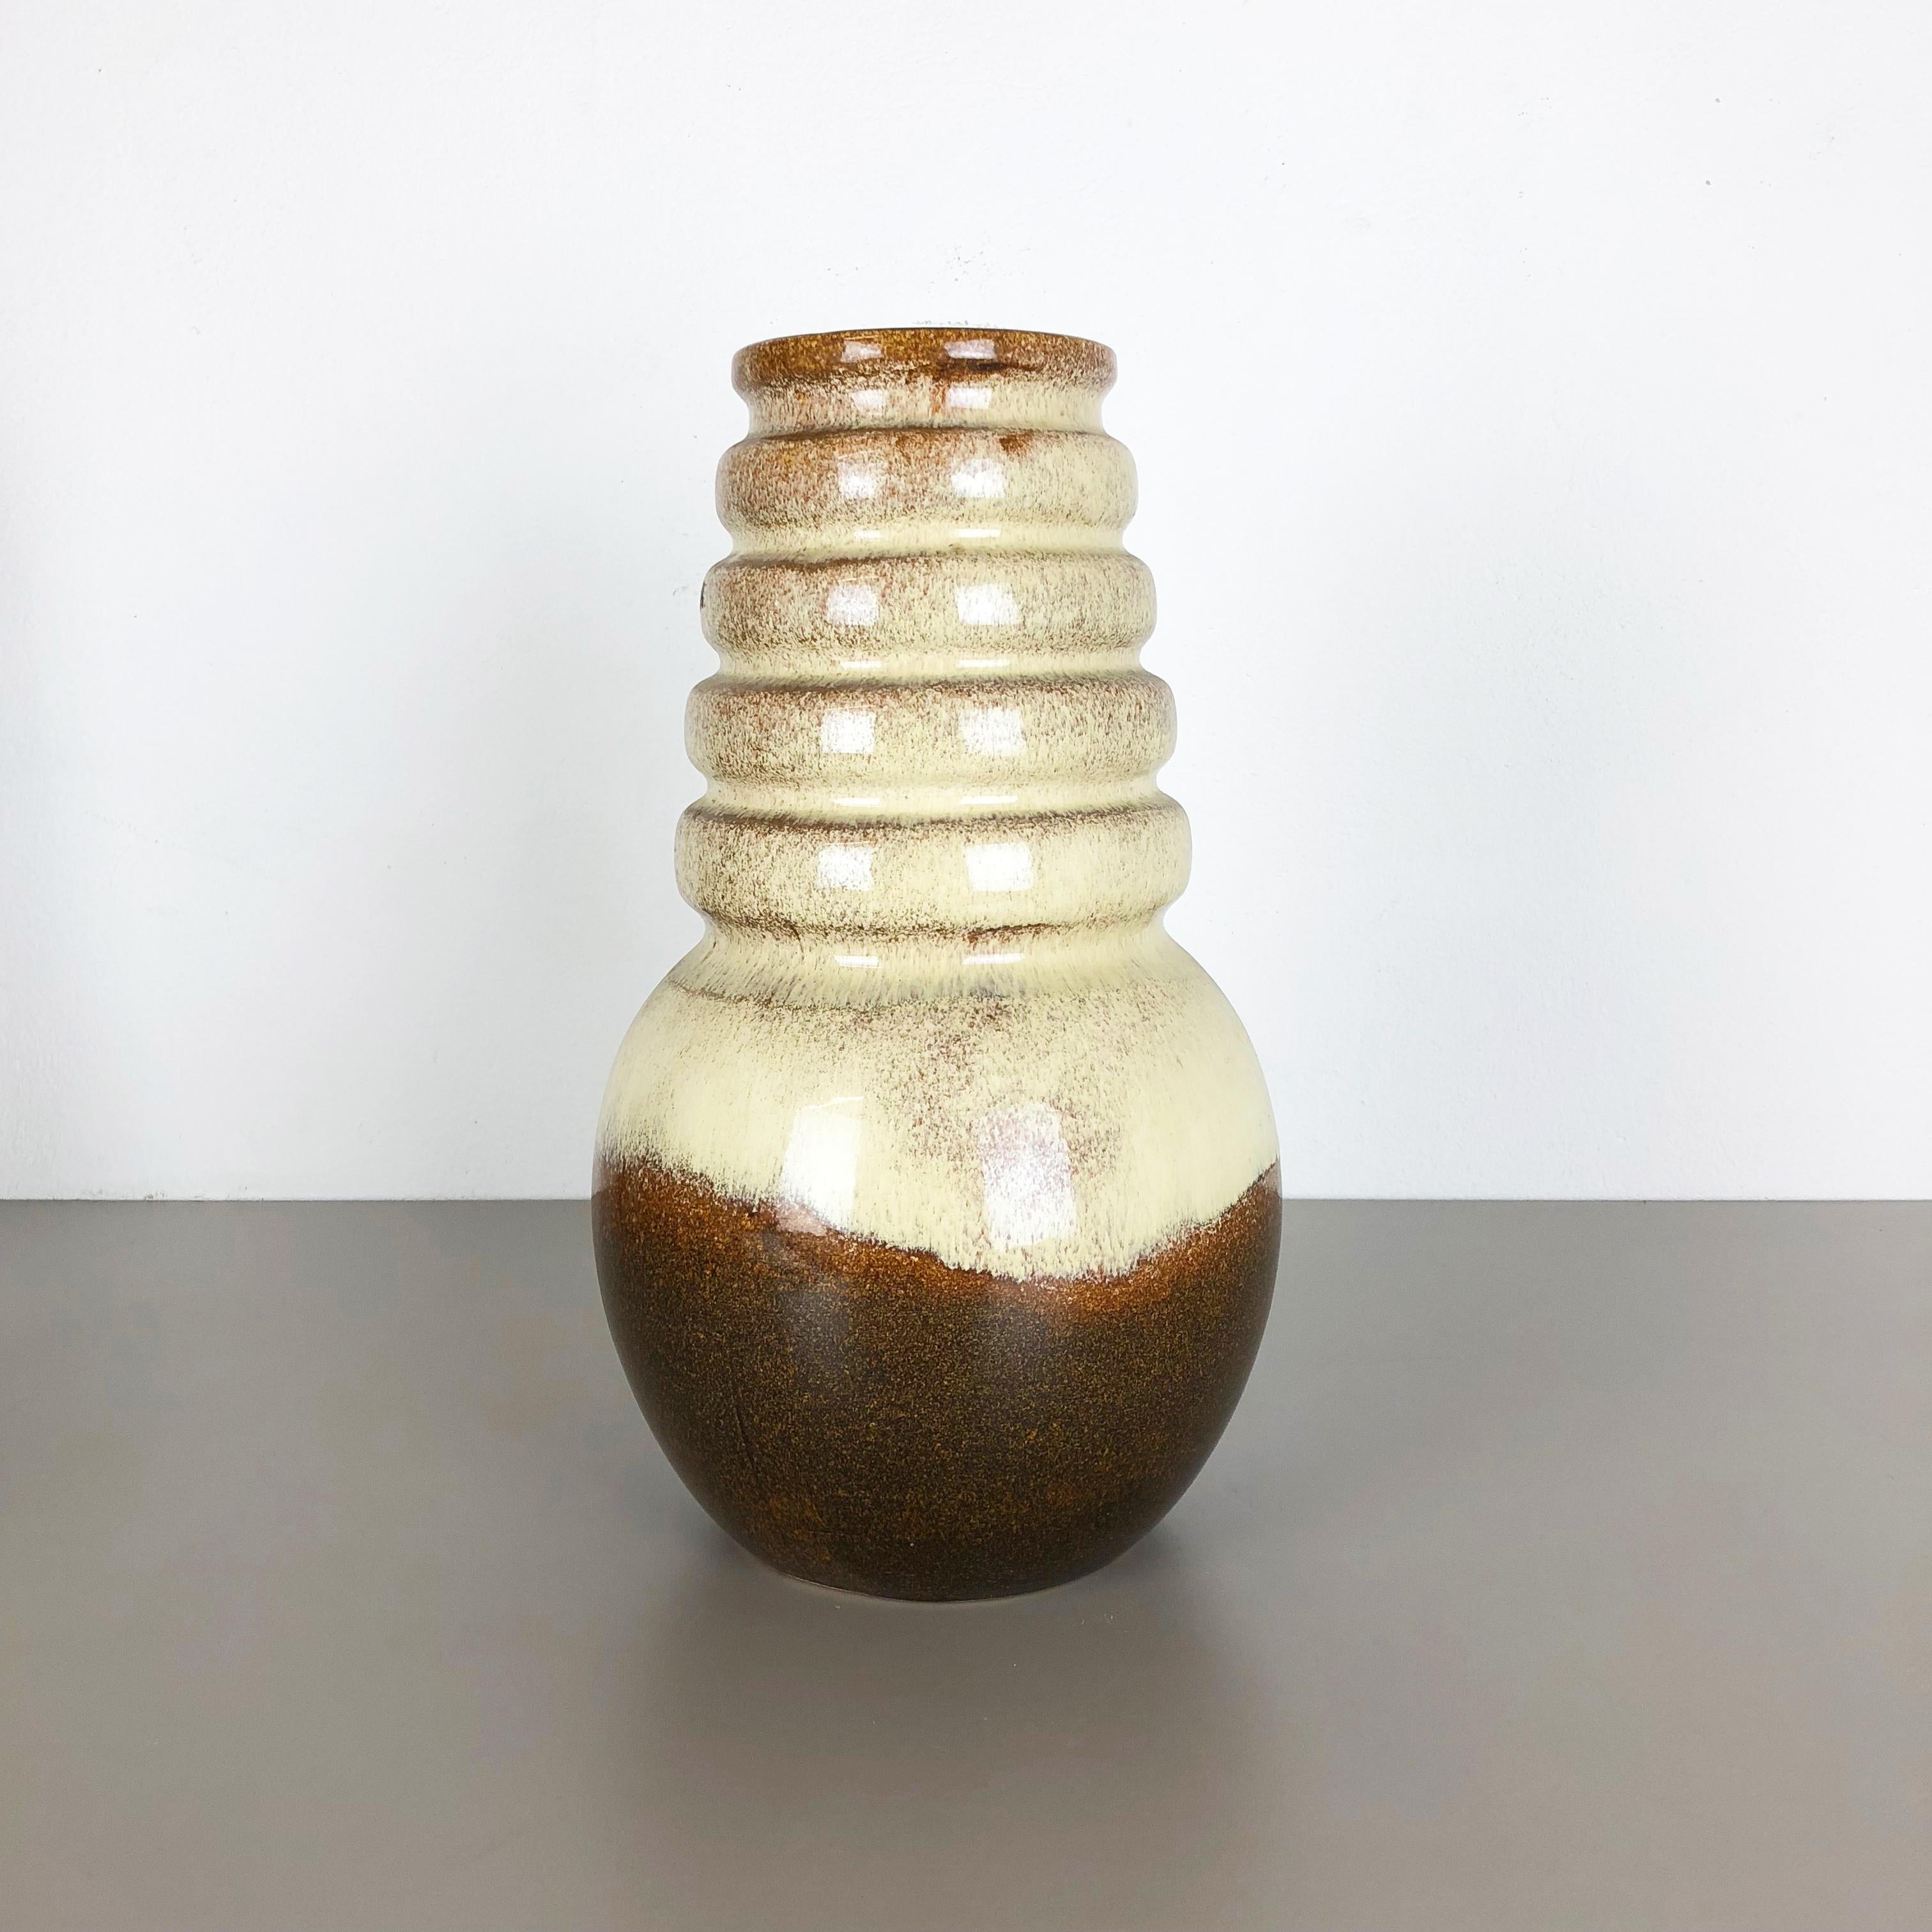 Article:

Fat lava art vase


Model: Vienna


Producer:

Scheurich, Germany



Decade:

1970s


Description:

This original vintage vase was produced in the 1970s in Germany. it is made of ceramic pottery in fat lava optic. Super rare in this